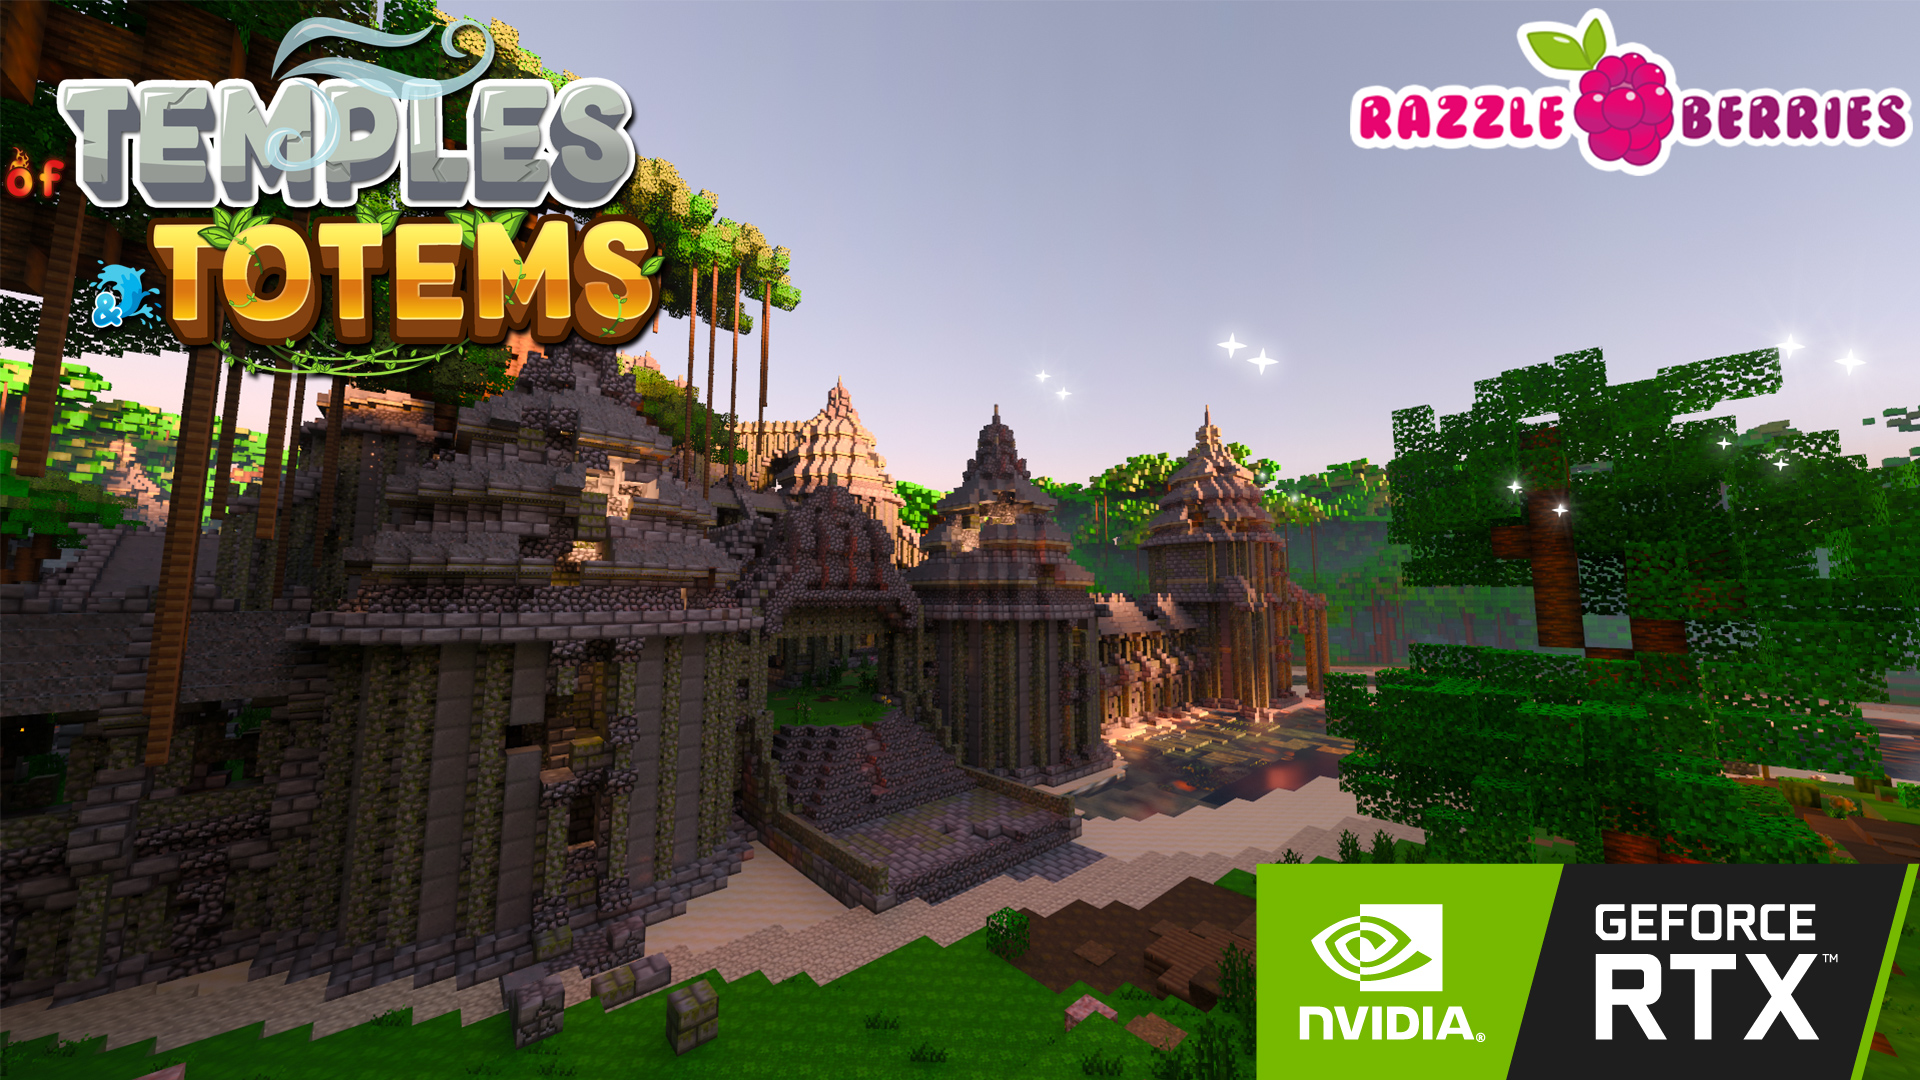 Gamerz Zone - Minecraft Java edition APK v14 free on Android: Real or fake?  Minecraft is available for download on the Google Play Store for Android  devices. Downloading the game through third-party